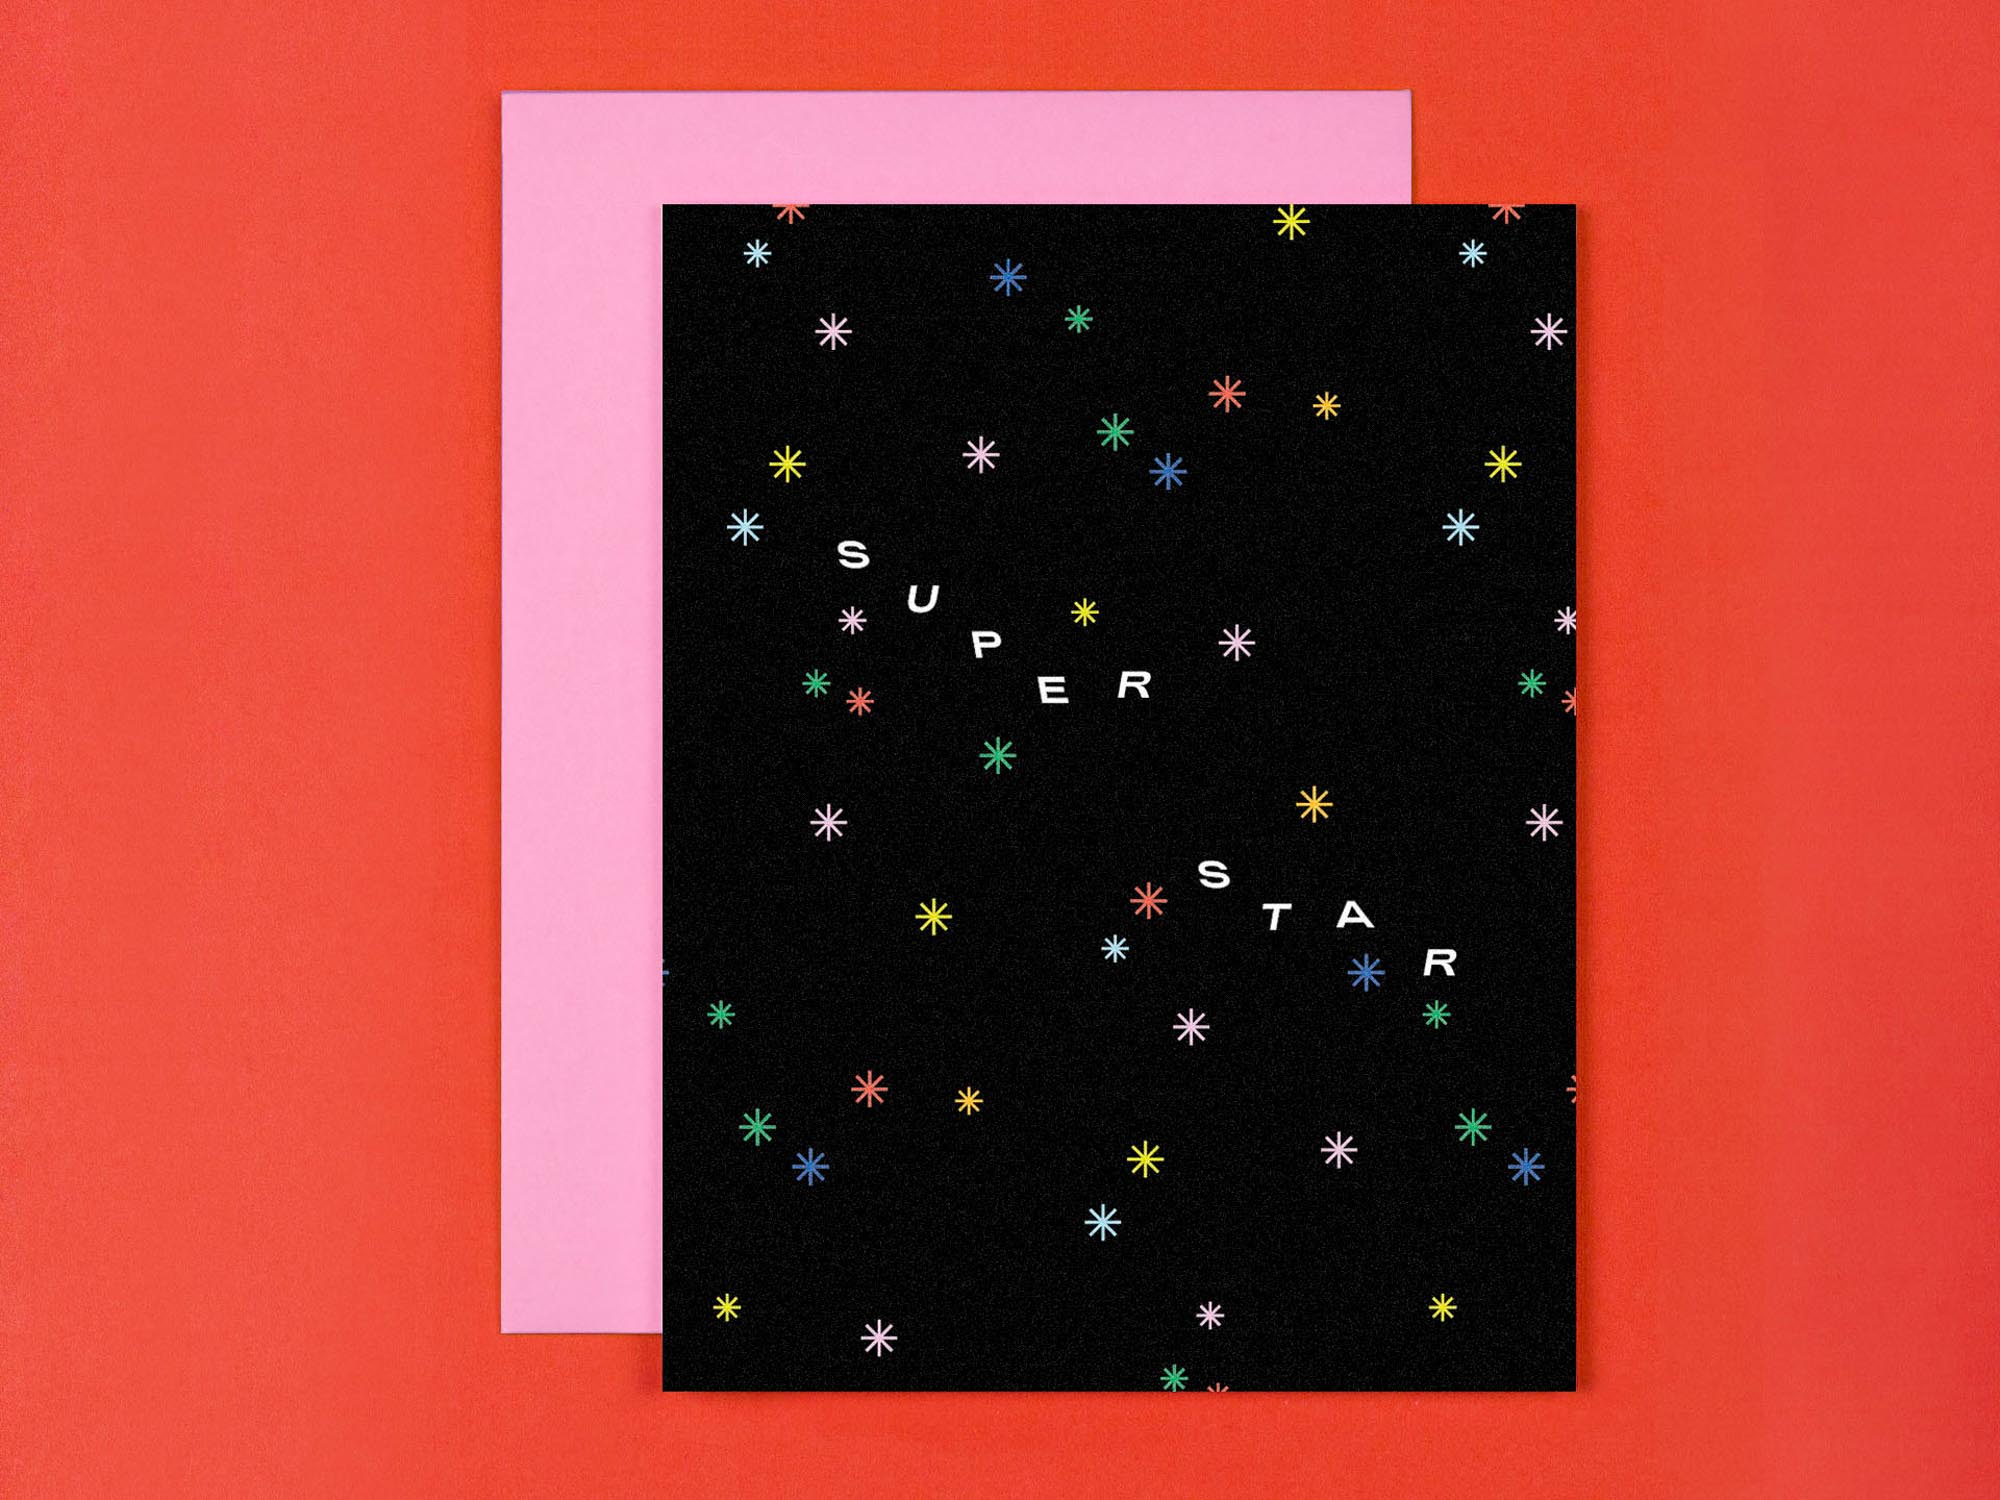 "Super Star" friendship or congrats card with rainbow midcentury stars design. Made in USA by @mydarlin_bk